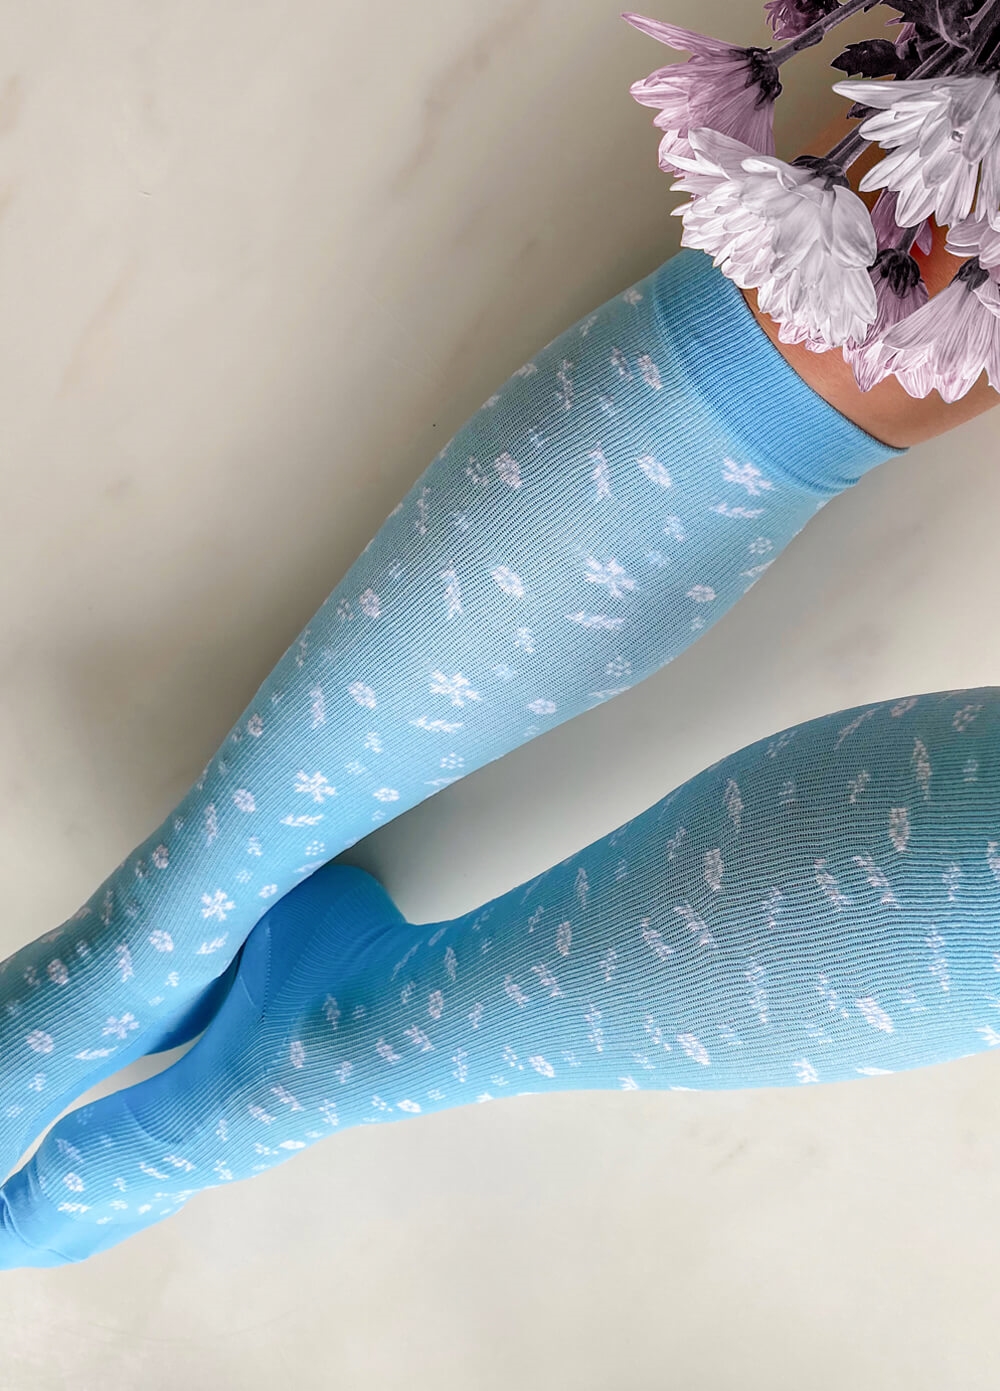 Mama Sox - Excite Maternity Compression Socks in Blue Floral